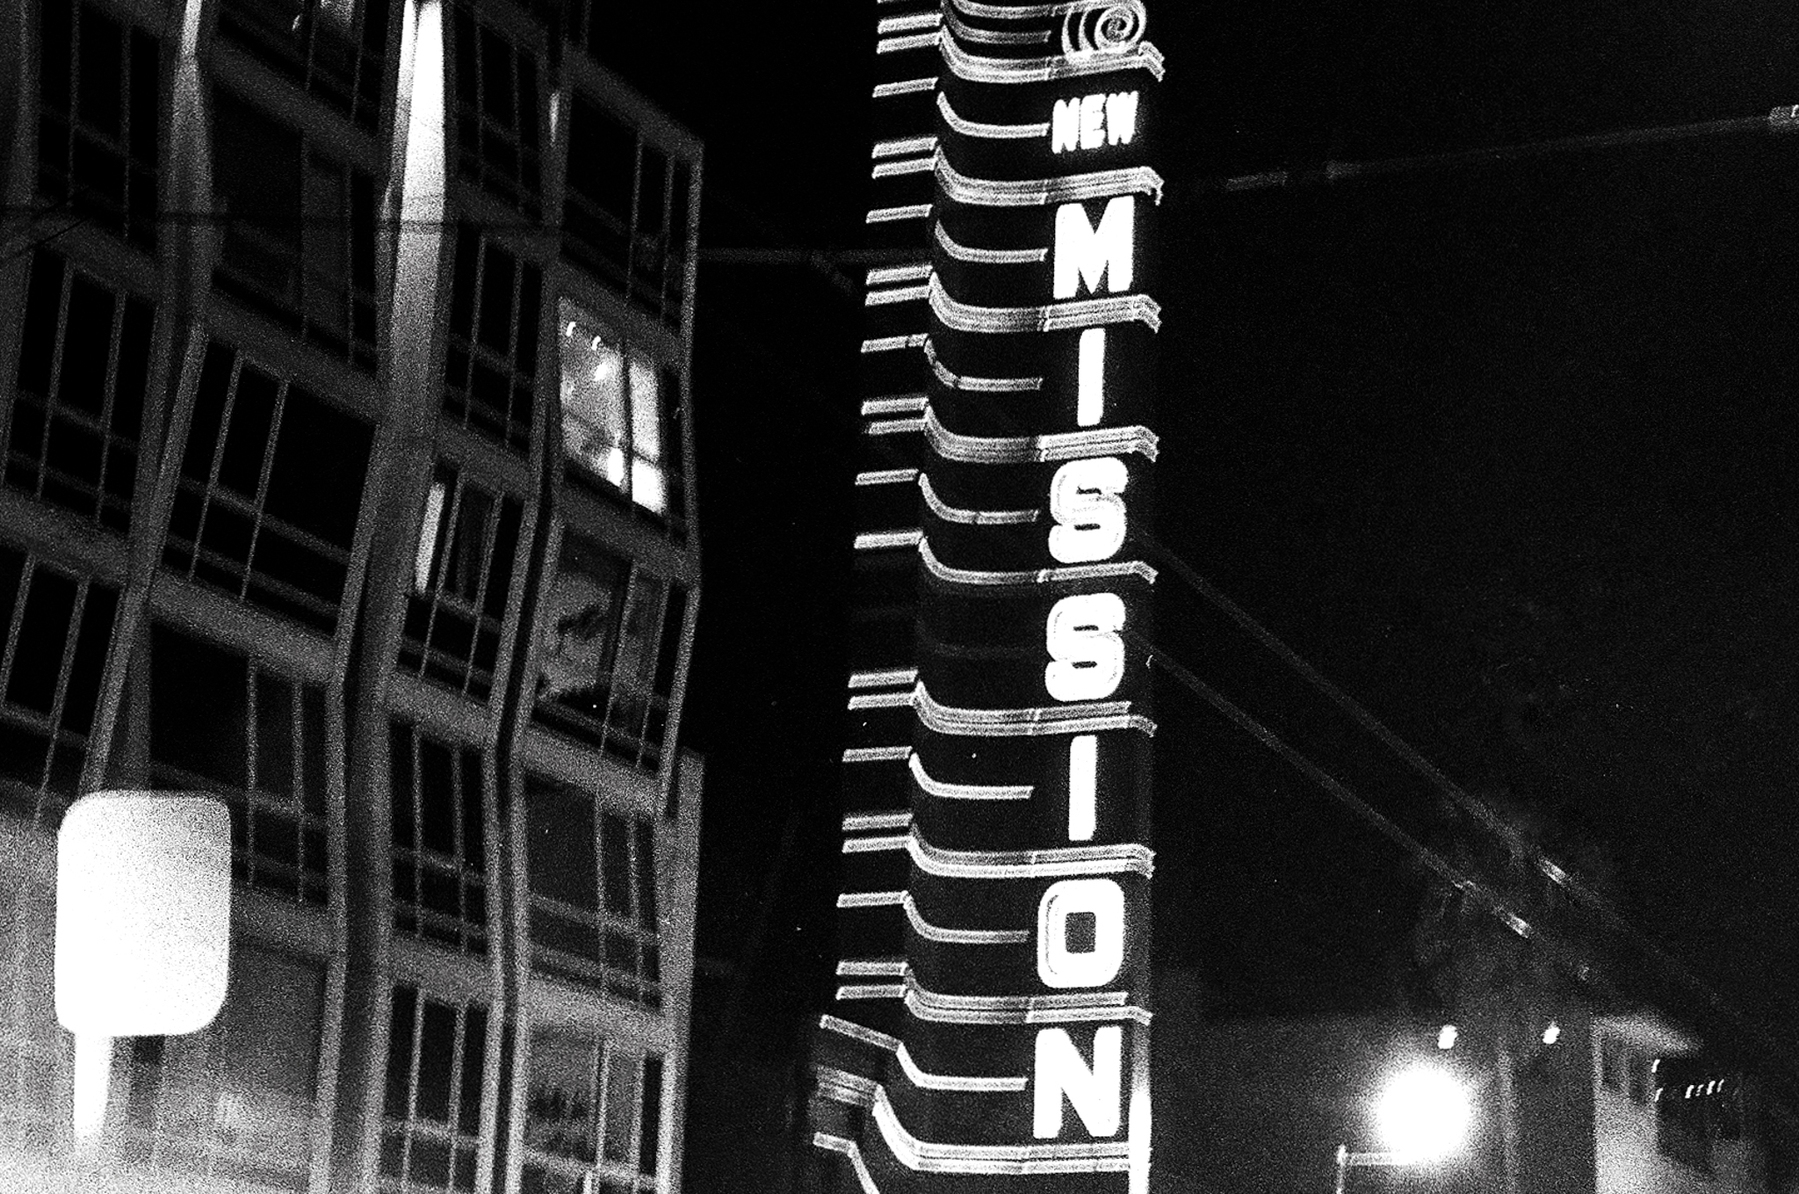 a scan of a black and white photo showing the retro sign of the Mission cinema